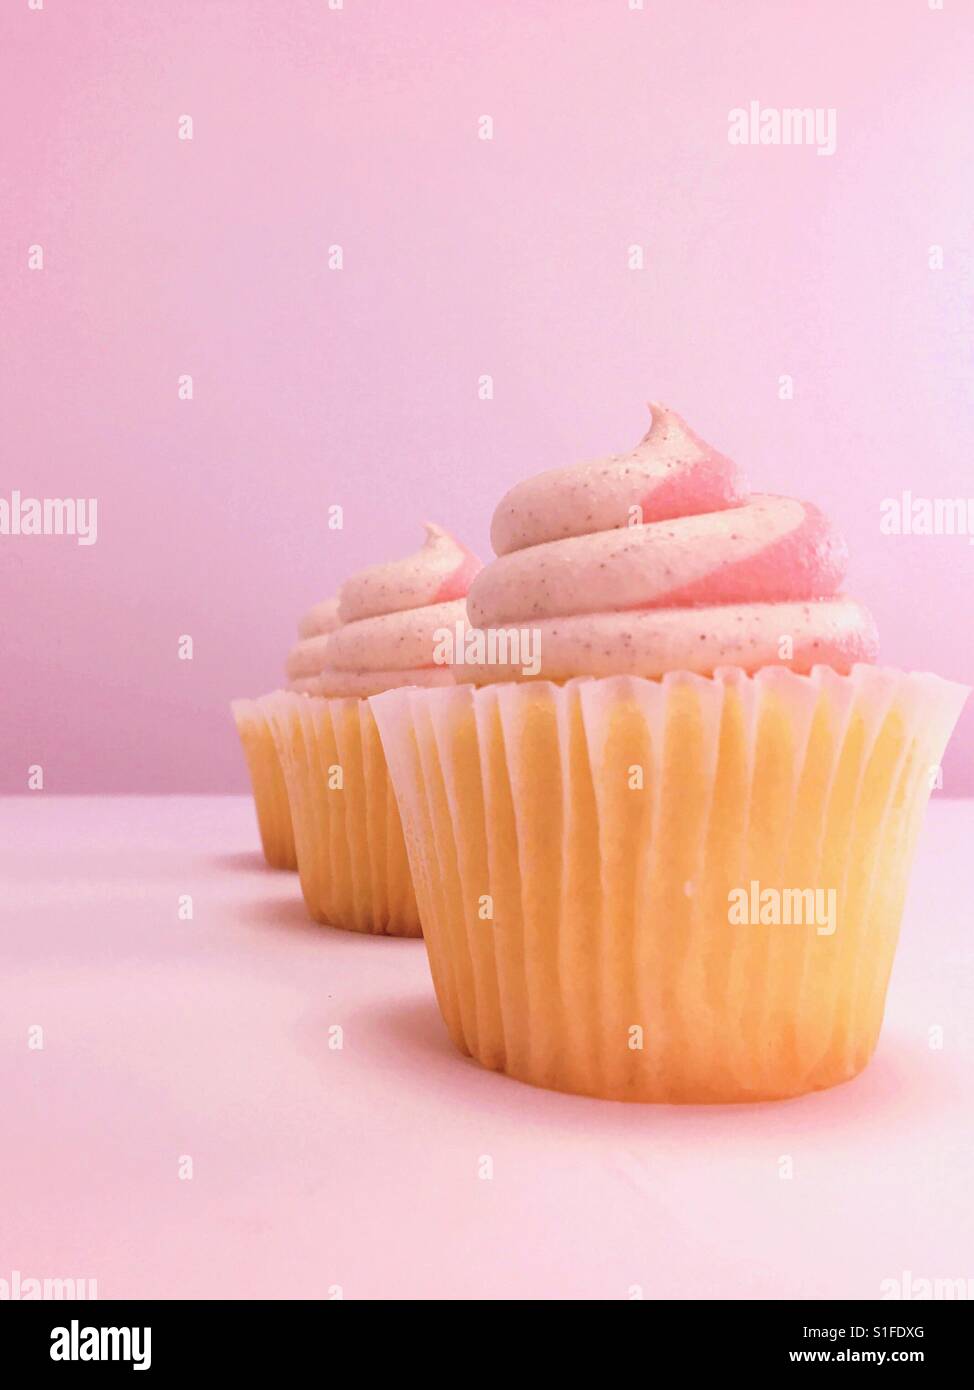 Cupcakes with swirly frosting. Pink background. Space for copy. Stock Photo